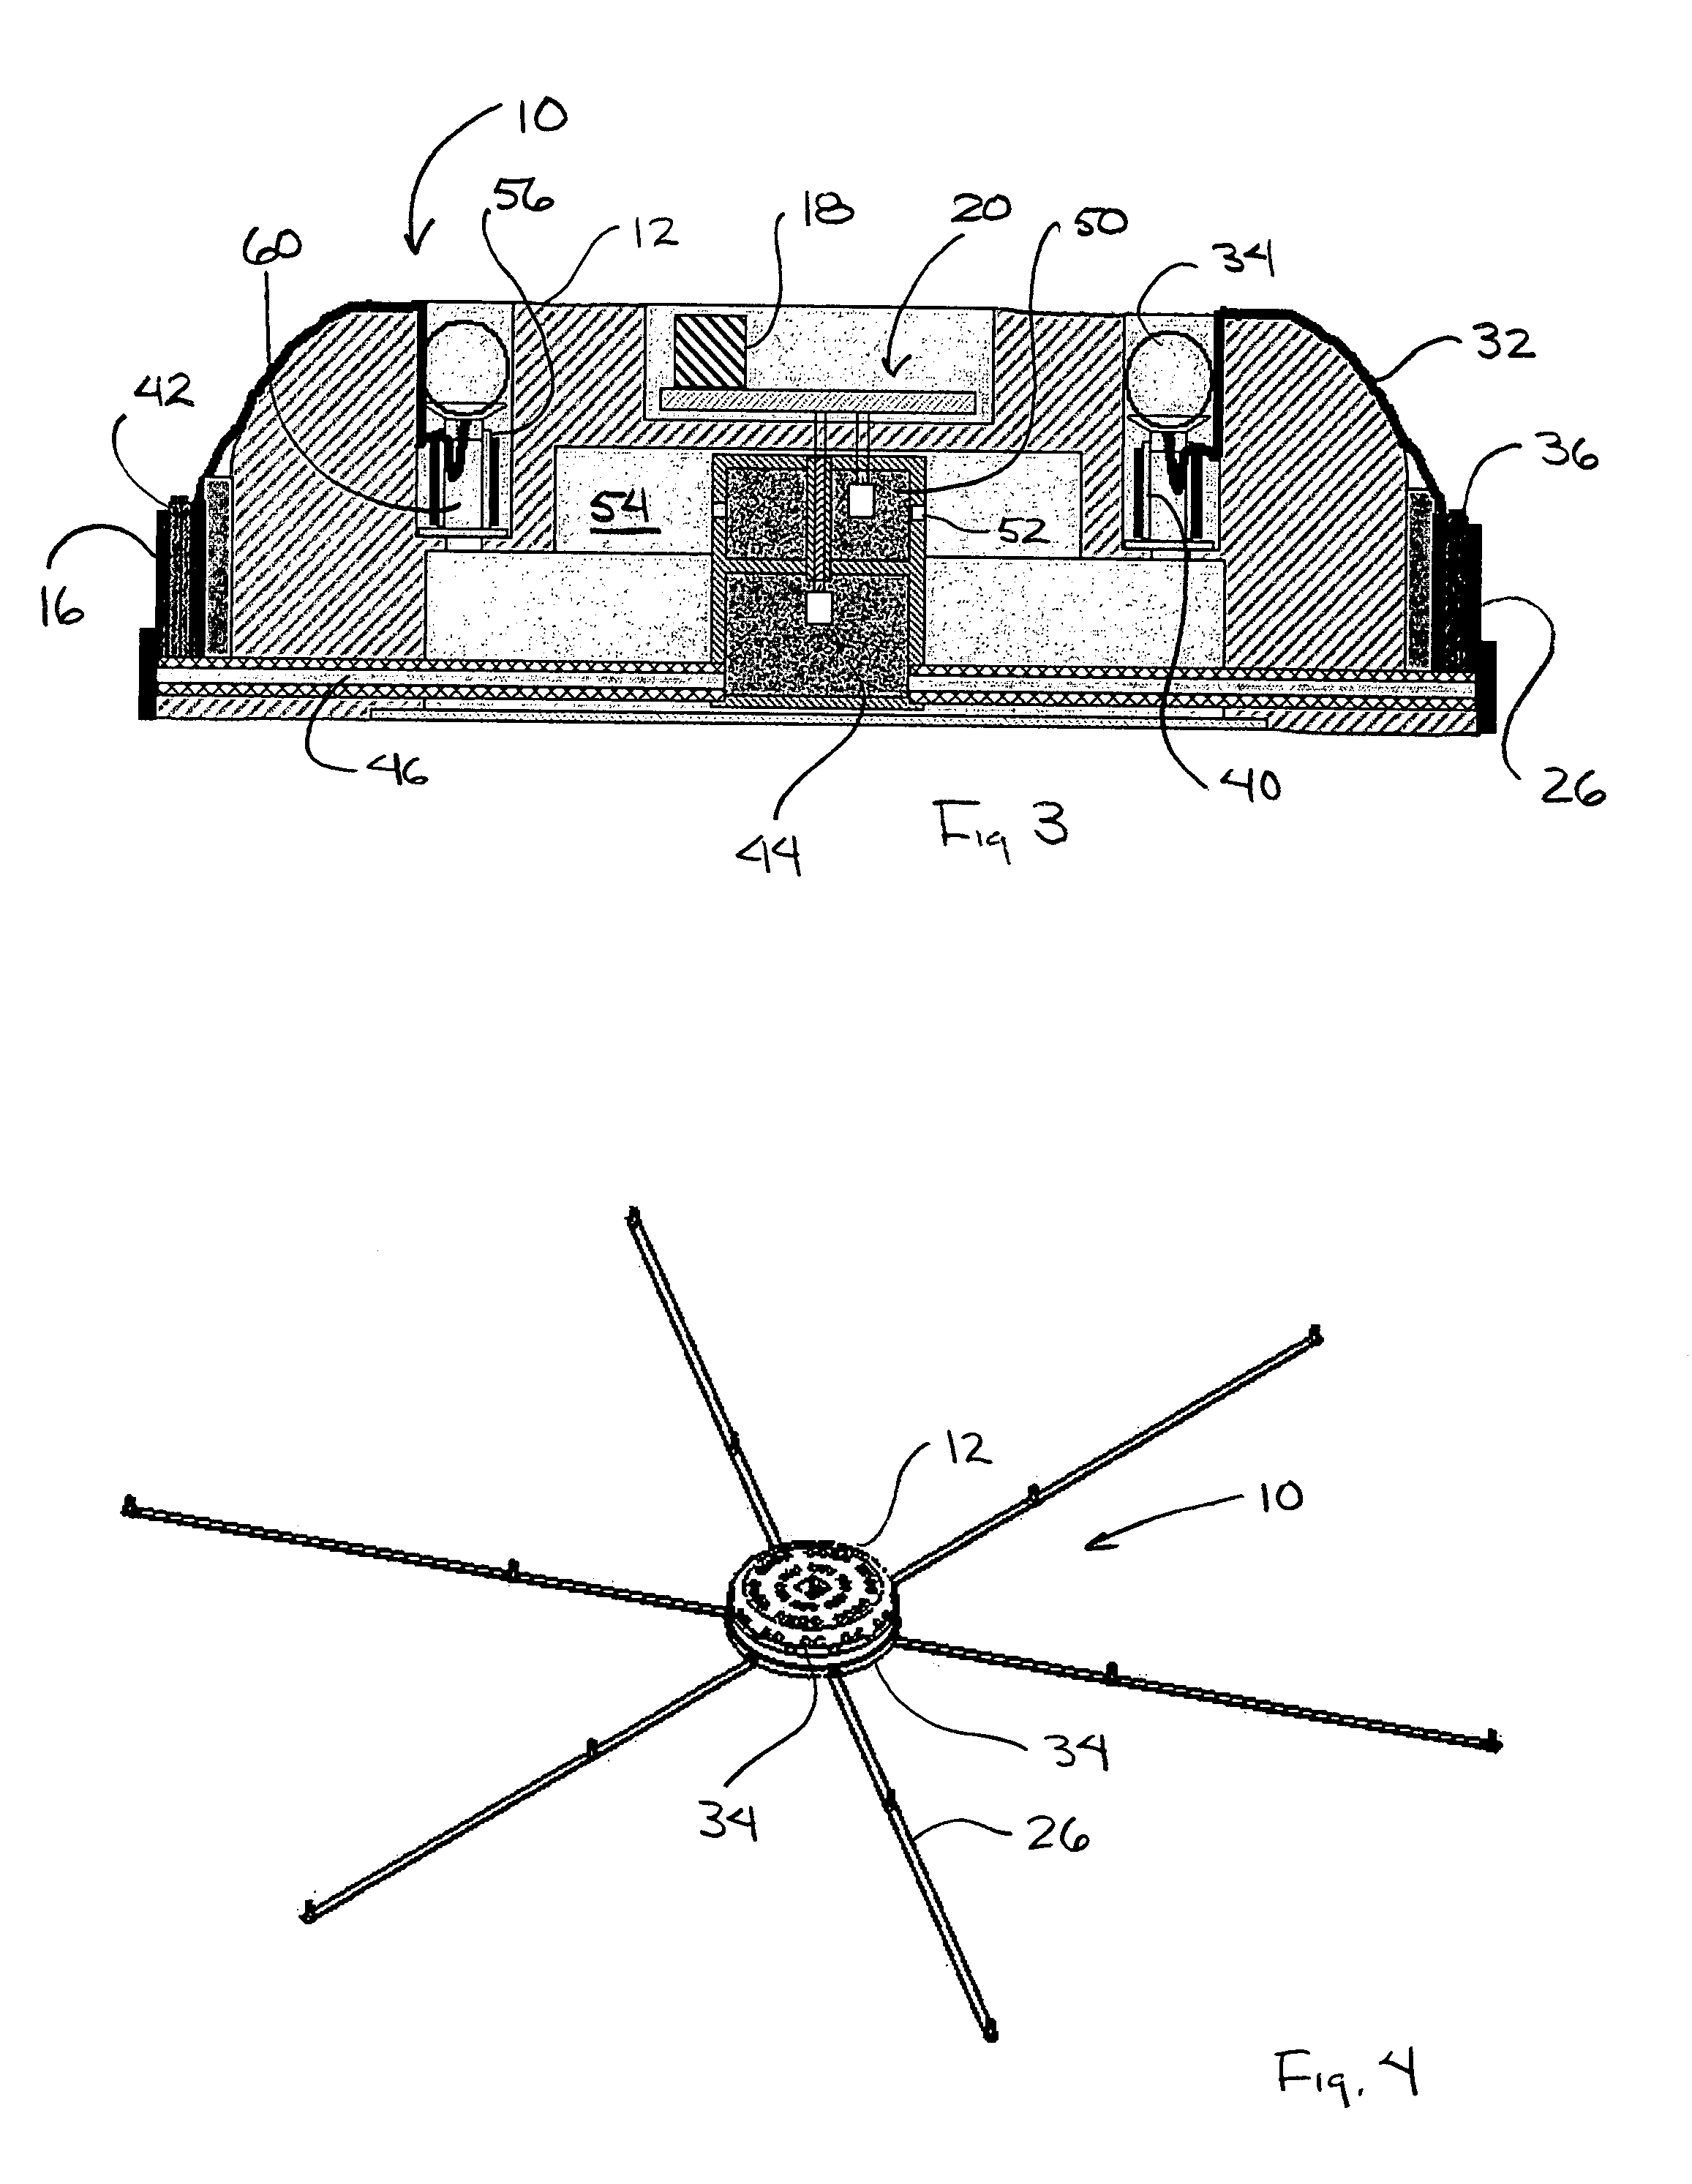 System and method for non-lethal vehicle restraint